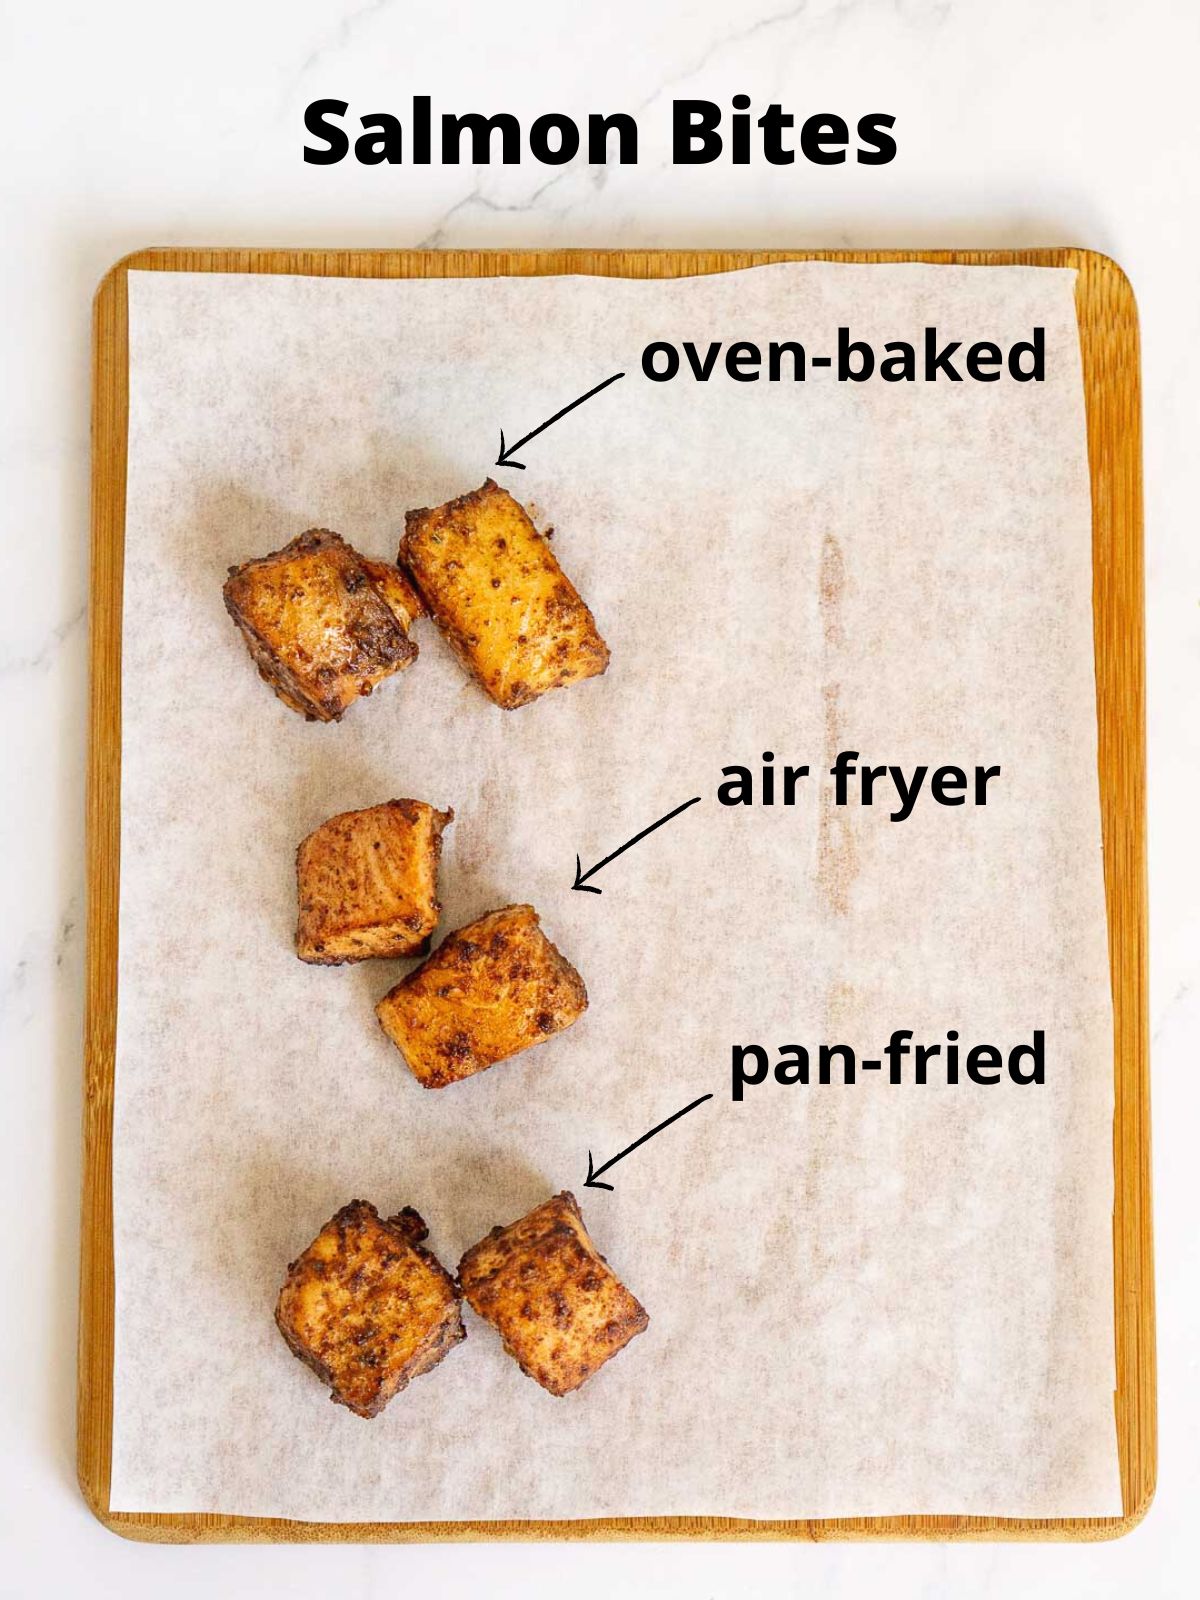 Salmon bites prepared 3 ways: air fryer, pan-fried, and oven-baked